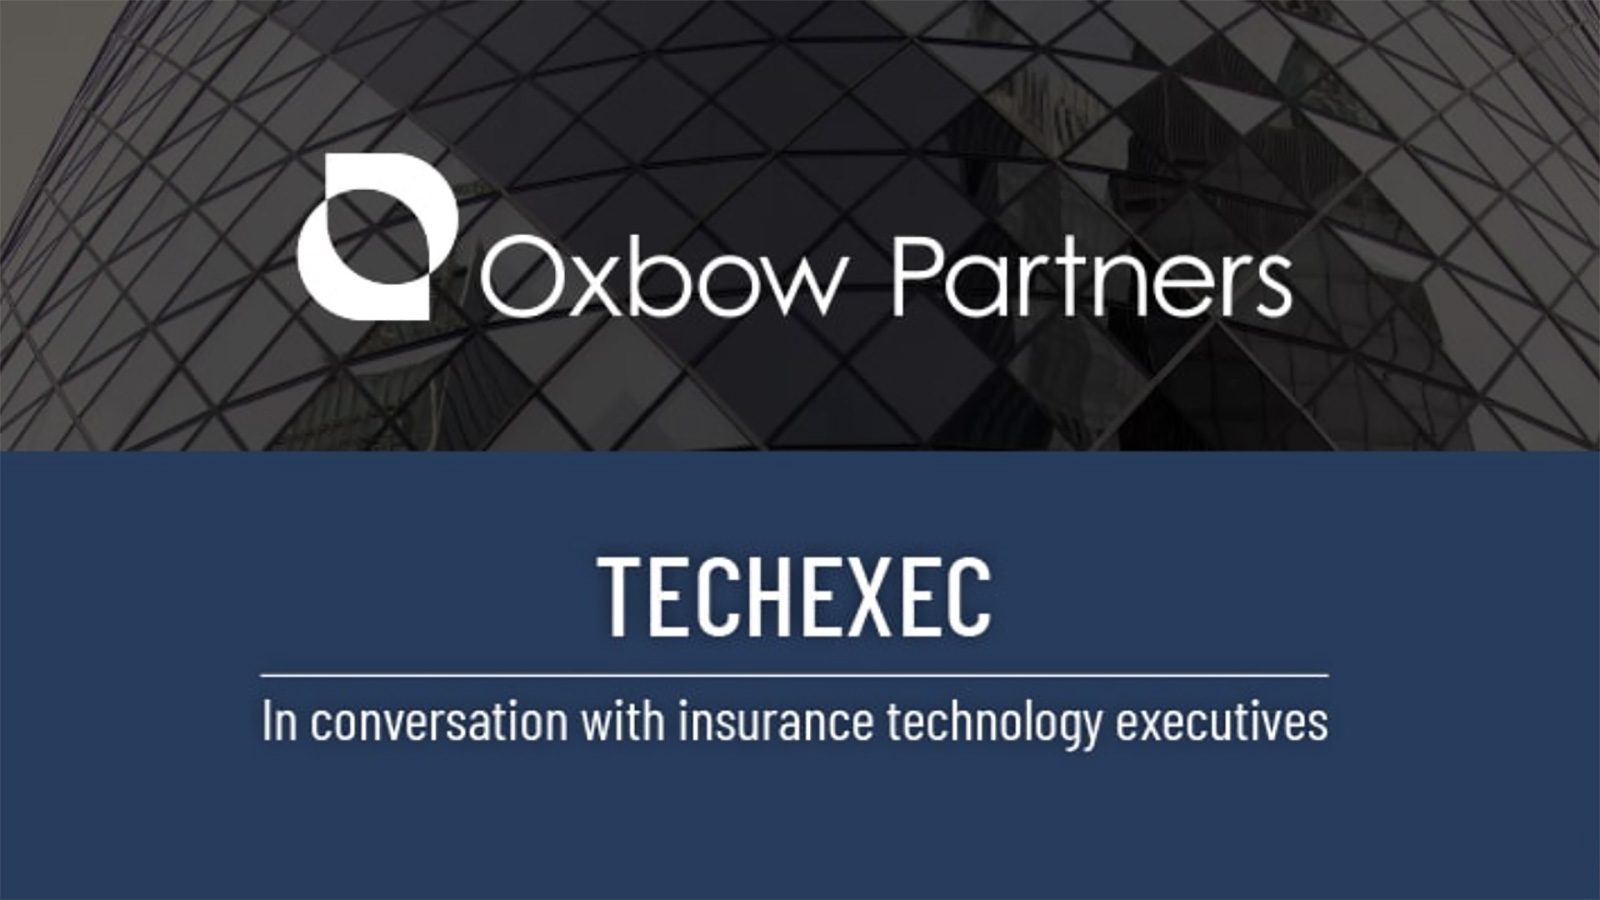 sum.cumo in interview with Oxbow Partners